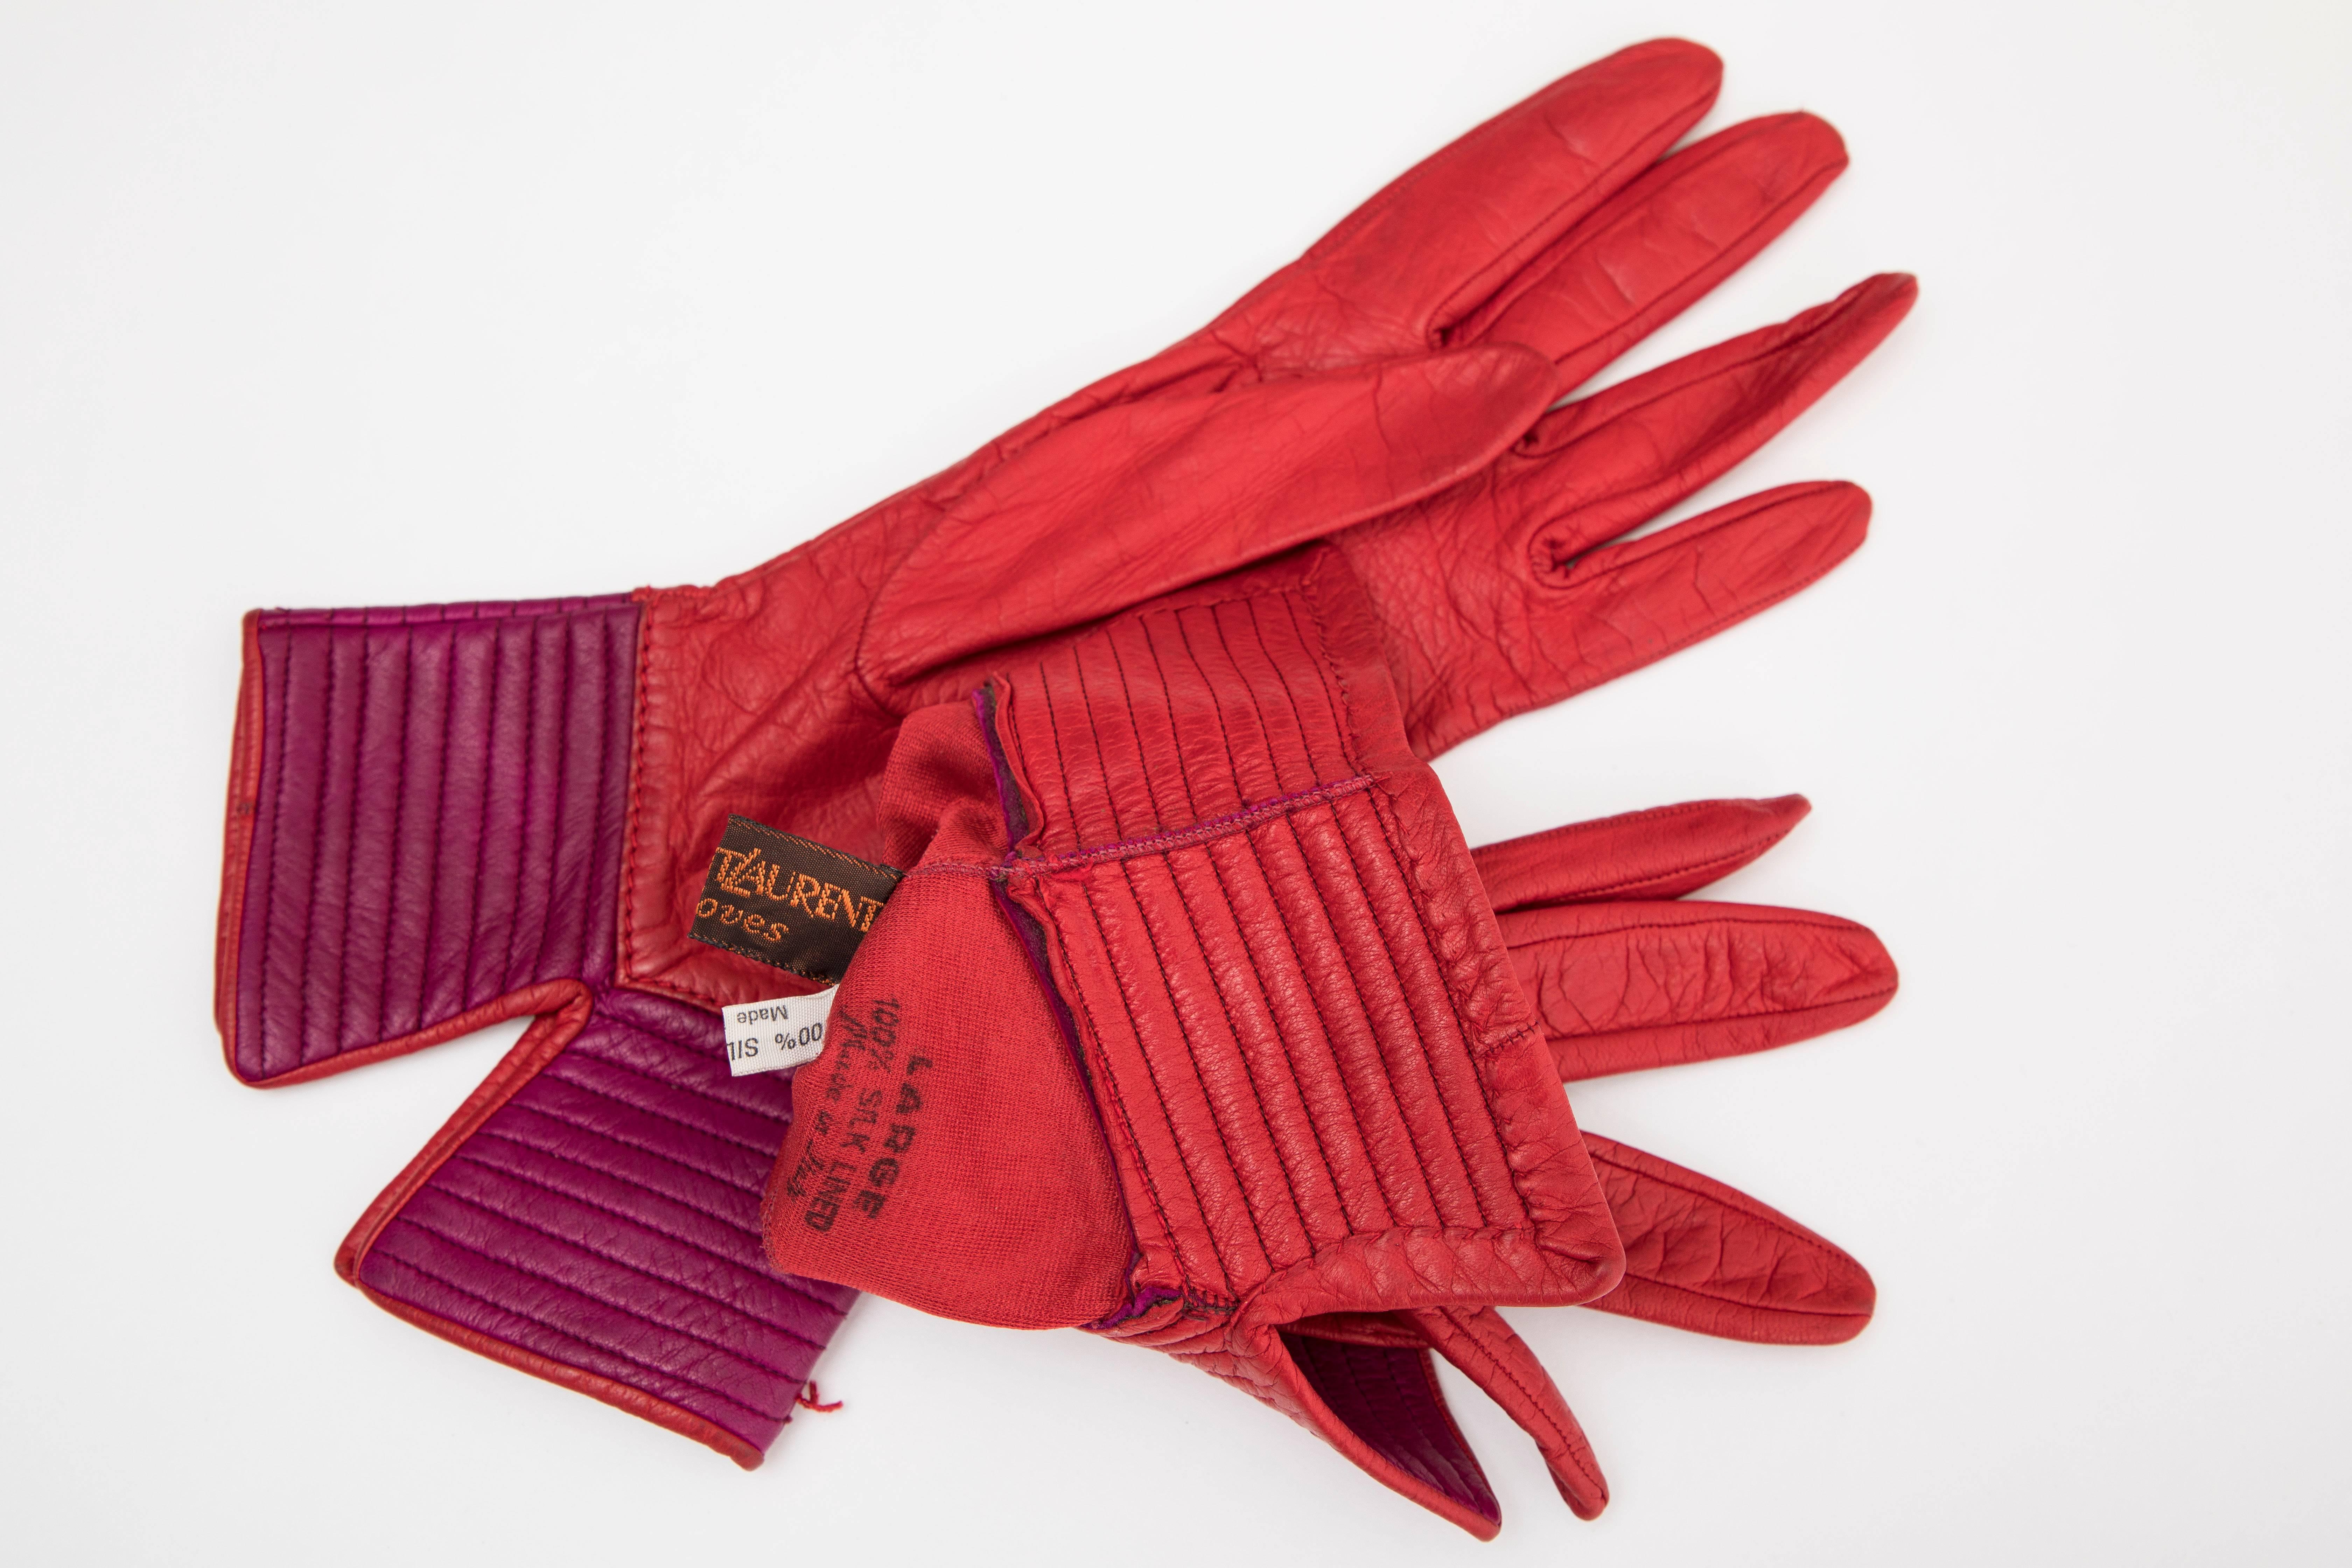 Yves Saint Laurent Color-Block Leather Gloves Silk Lining, Circa 1970s In Excellent Condition For Sale In Cincinnati, OH